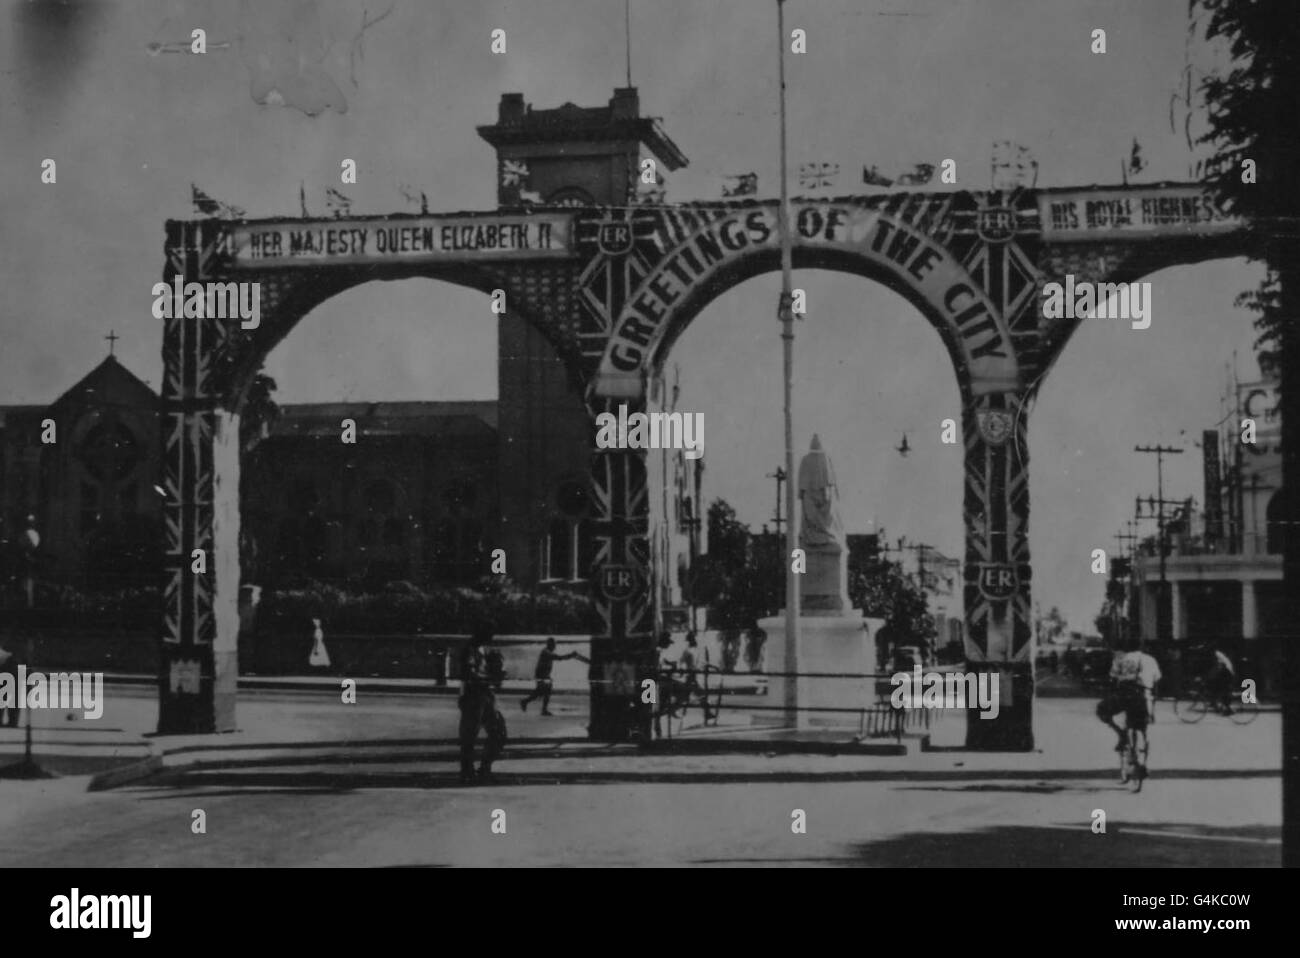 A triumphal arch bearing greetings in Kingston, Jamaica, preparing to receive Queen Elizabeth II and the Duke of Edinburgh. Stock Photo